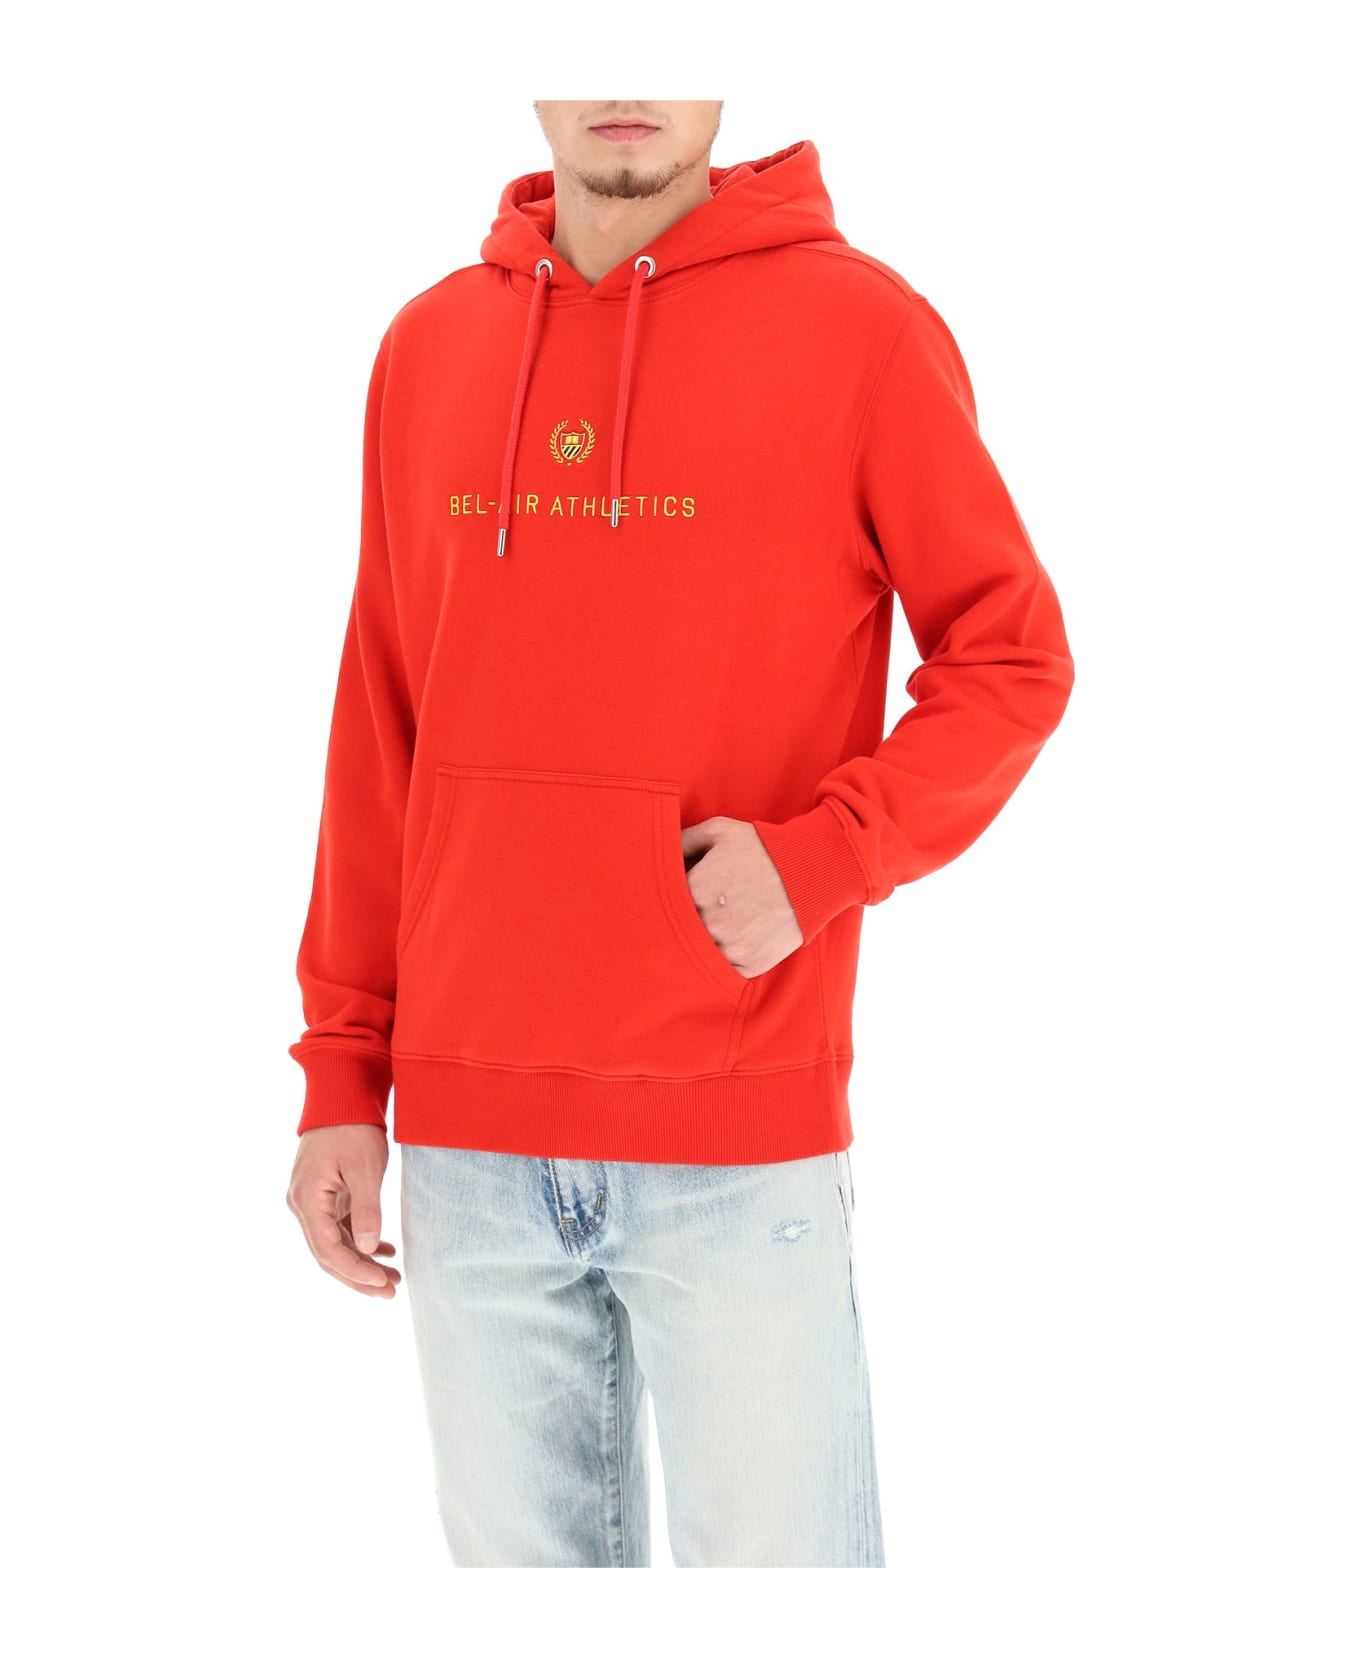 Bel-Air Athletics Academy Embroidery Hoodie - Rosso